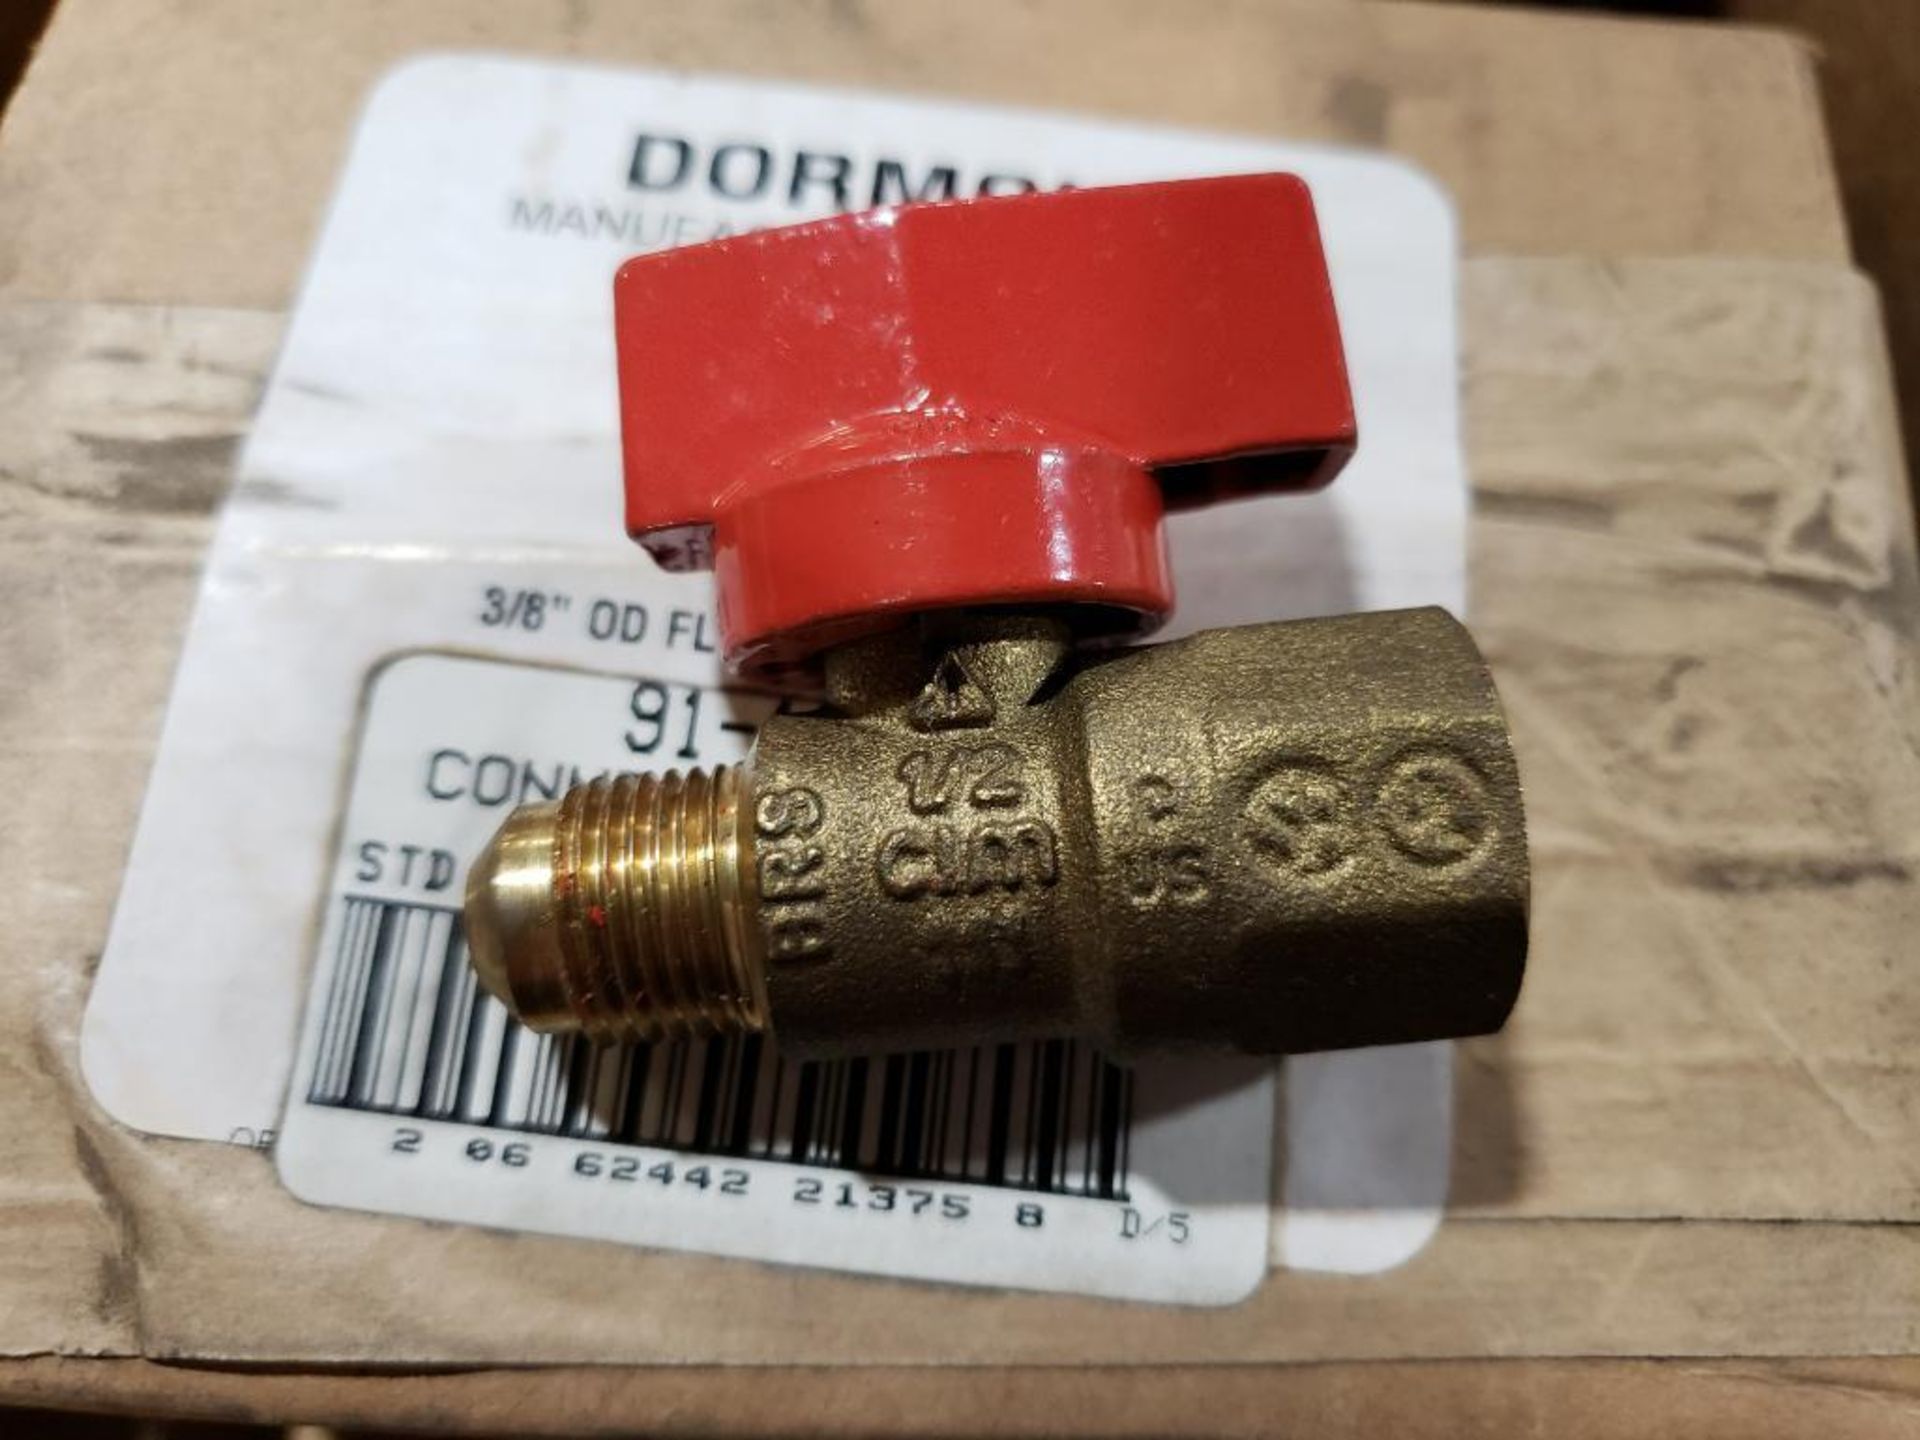 Qty 70 - Dormont brass valves. Part number 91-1032. New in bulk box, 7 boxes of 10. - Image 3 of 4